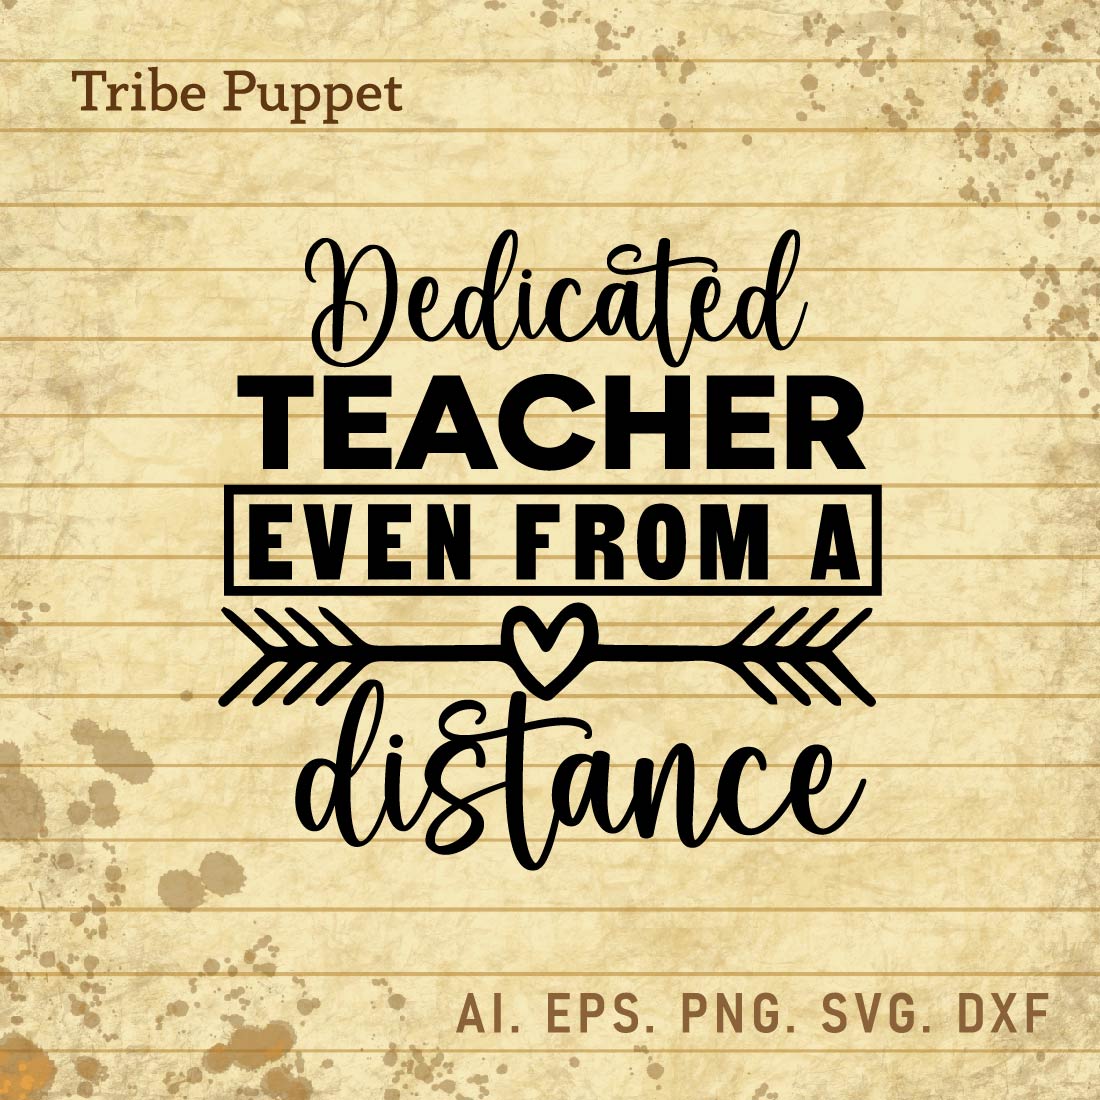 Teachers Quotes cover image.